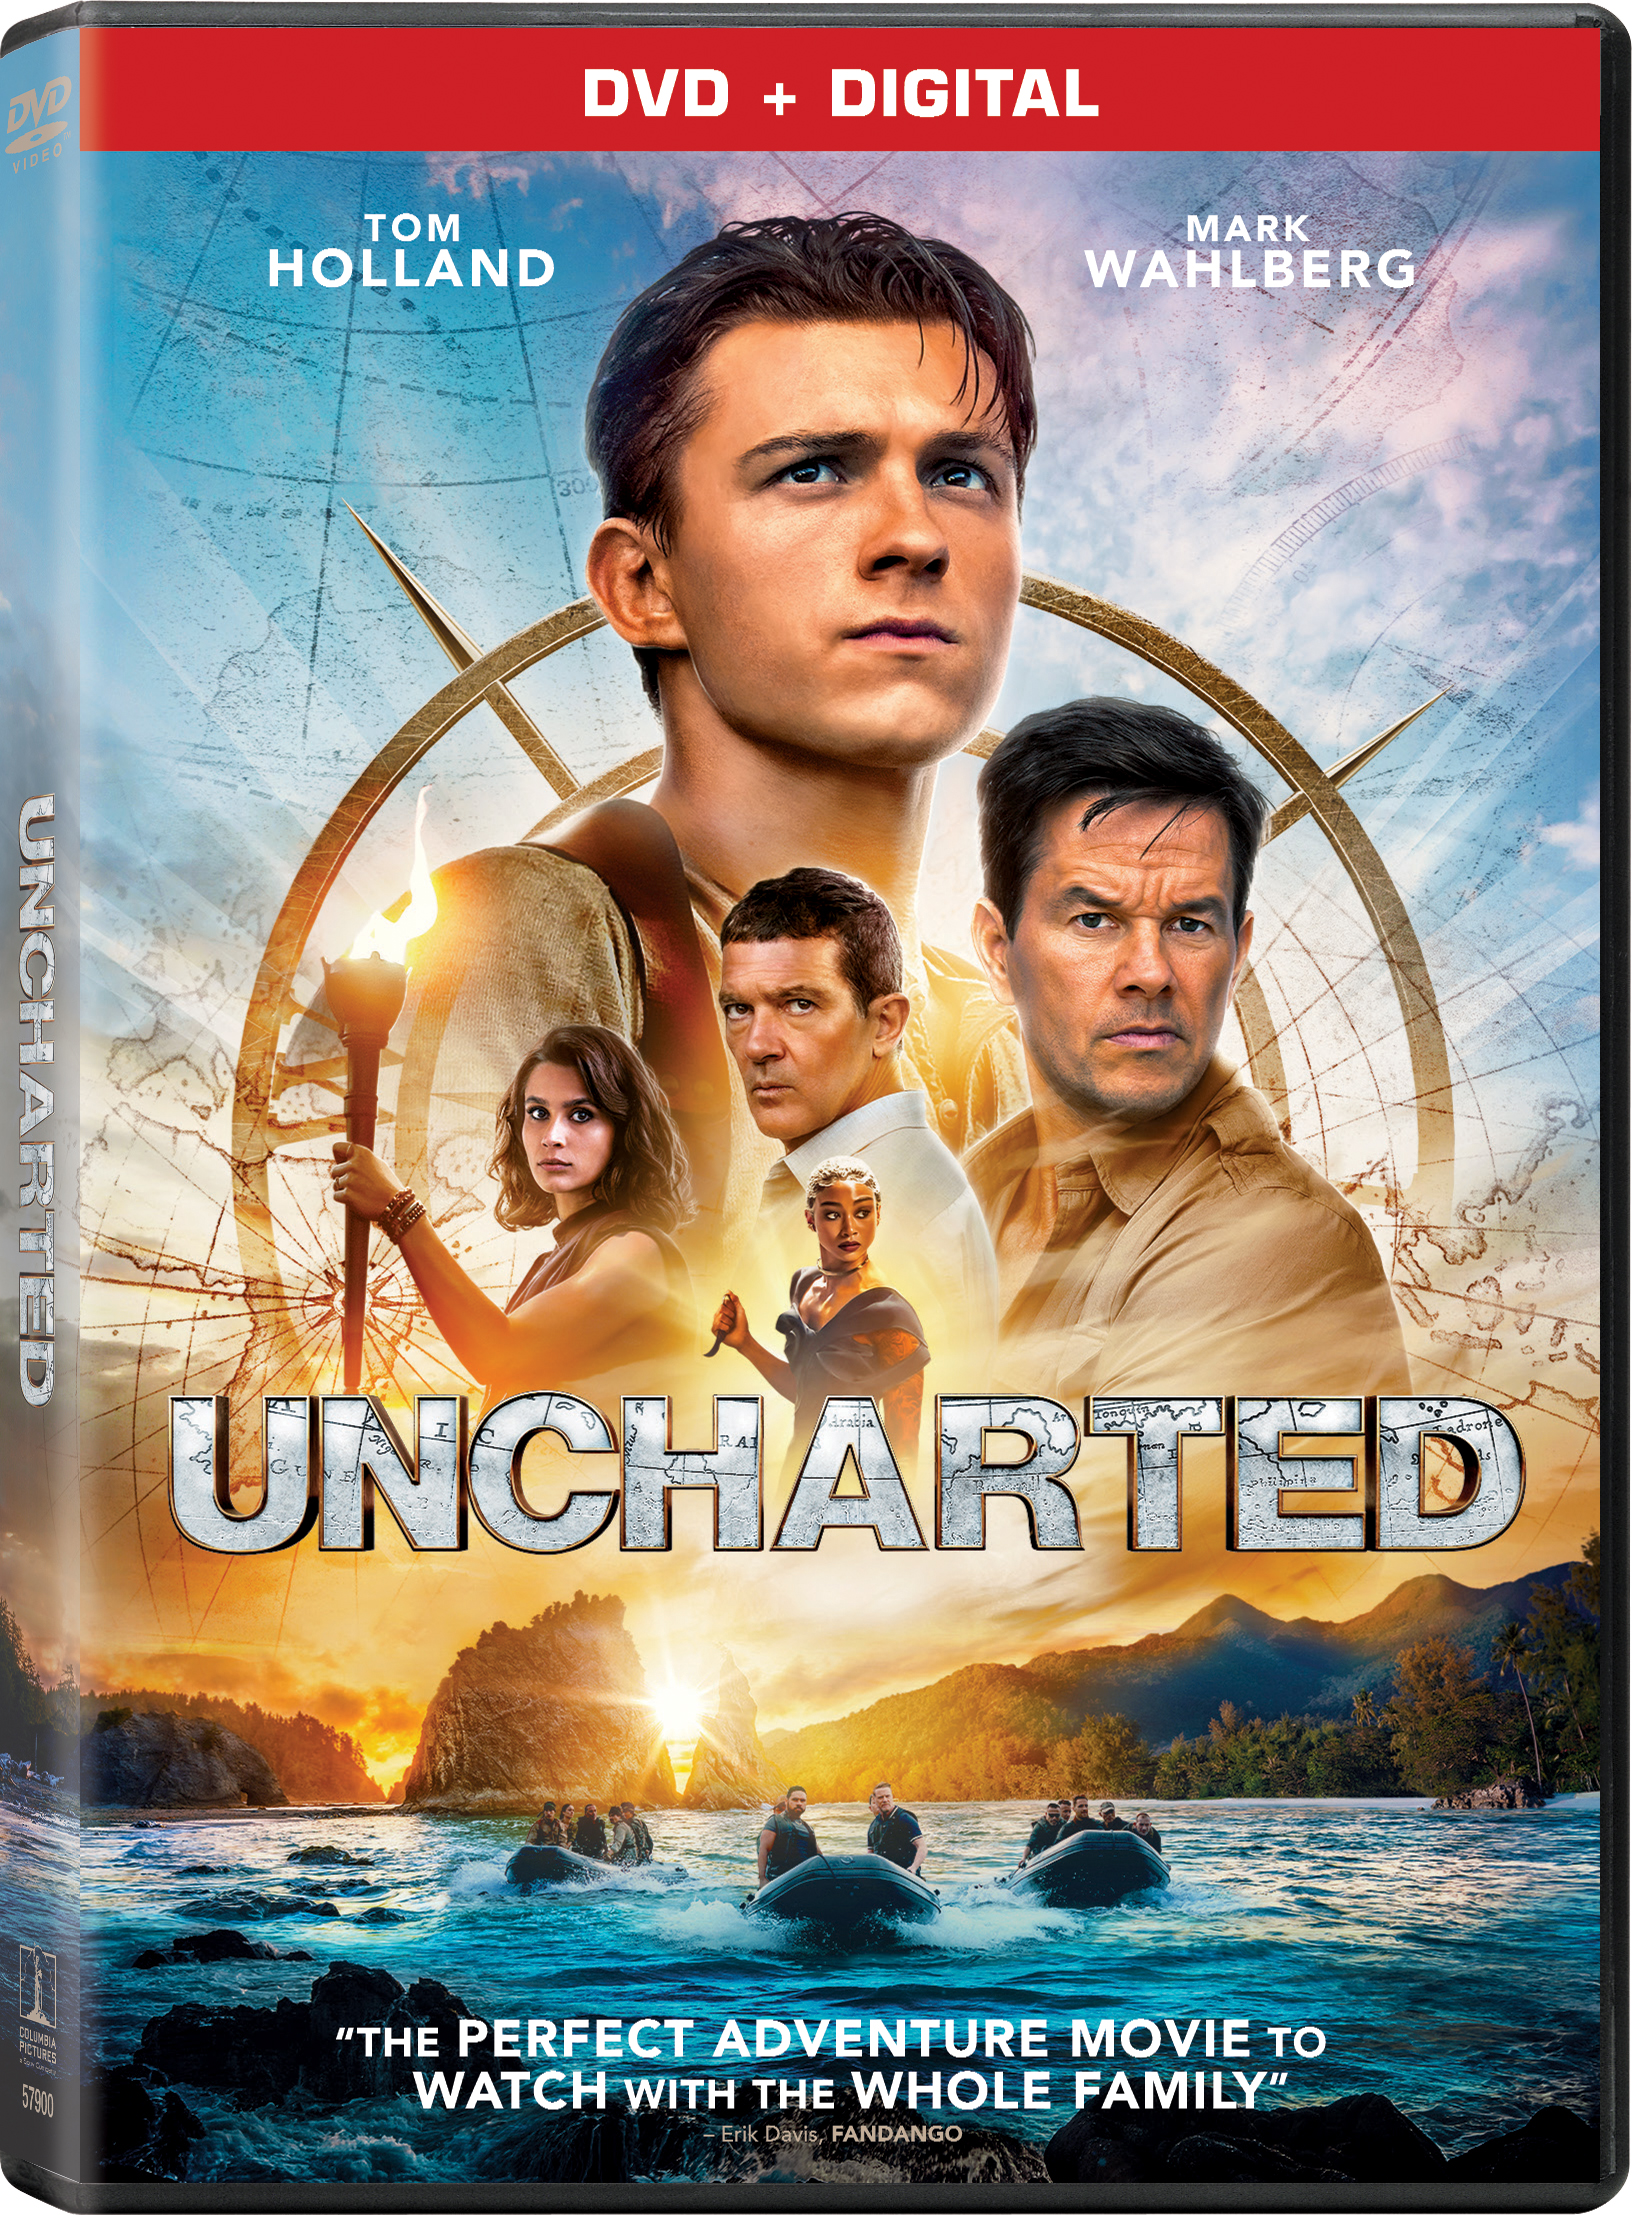 Uncharted To Release On Digital April 26th and 4K Ultra HD, Blu-Ray, and DVD May 10 - The Illuminerdi